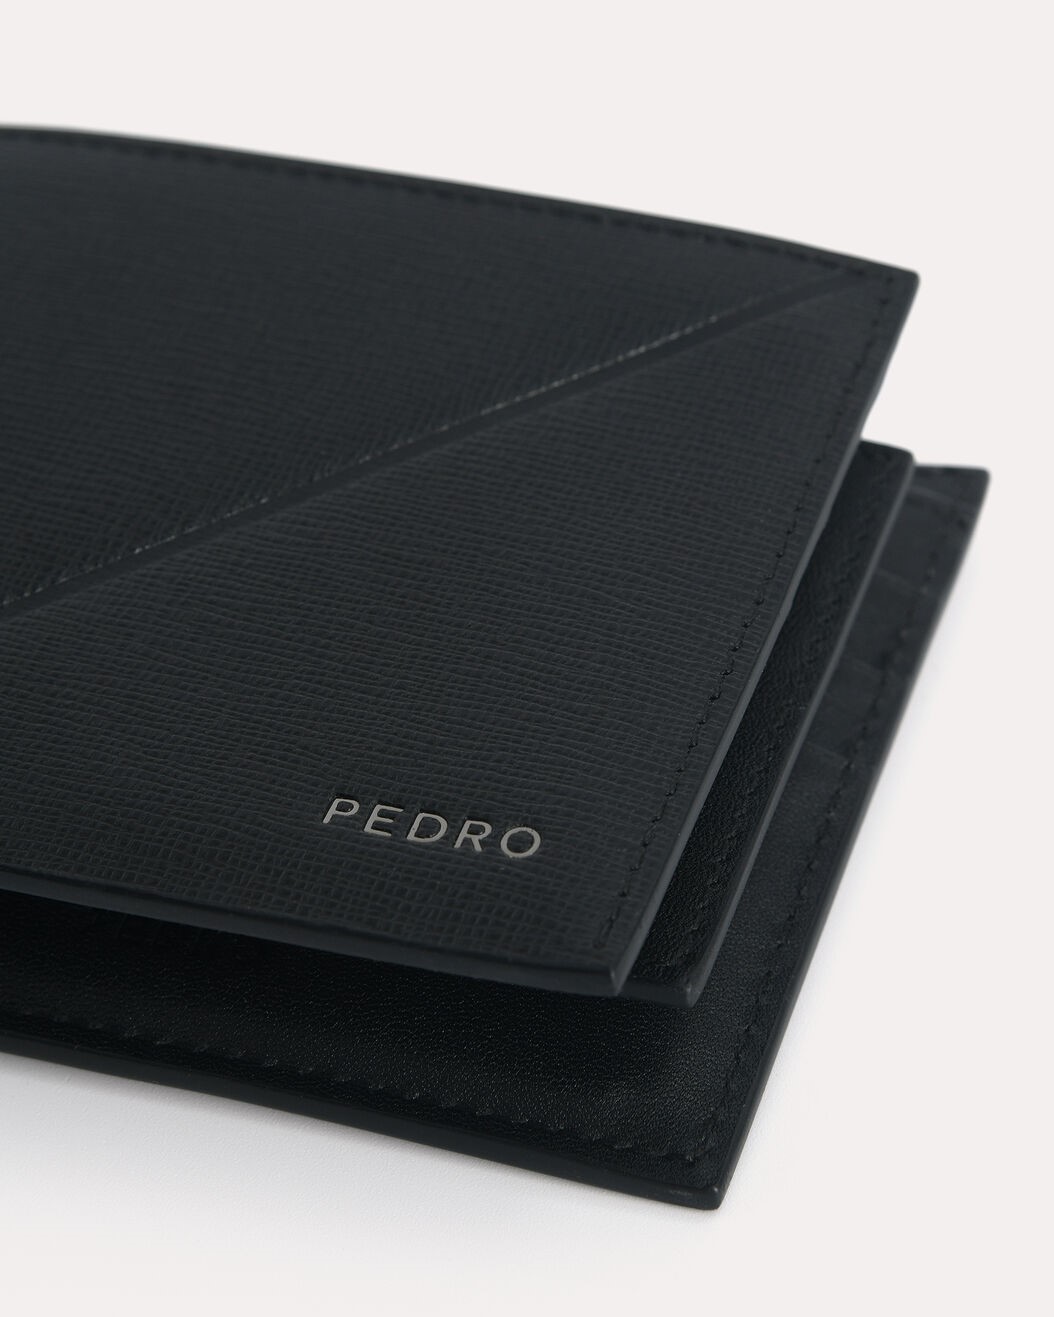 VÍ PEDRO TEXTURED LEATHER BI-FOLD WALLET WITH INSERT 8